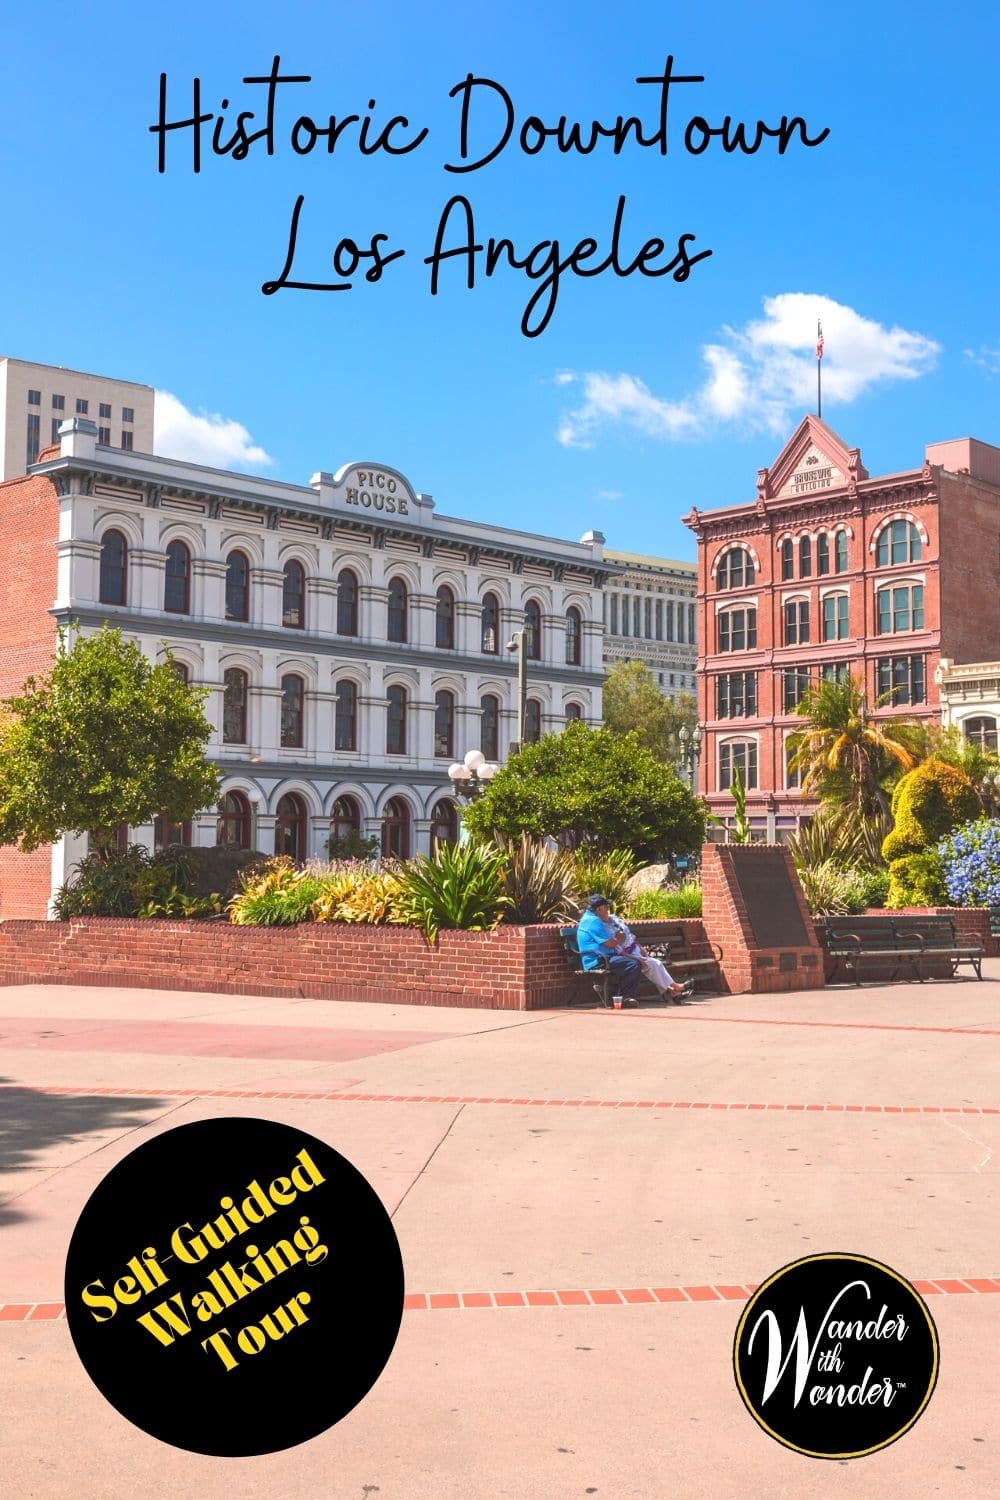 Take a free guided or self-guided walking tour of historic downtown Los Angeles to learn about the city's birthplace. Los Angeles is about so much more than the top tourist sites. Los Angeles native Mimi Slawoff walks through cultural heritage as you helps you wander and discover historic downtown Los Angeles.